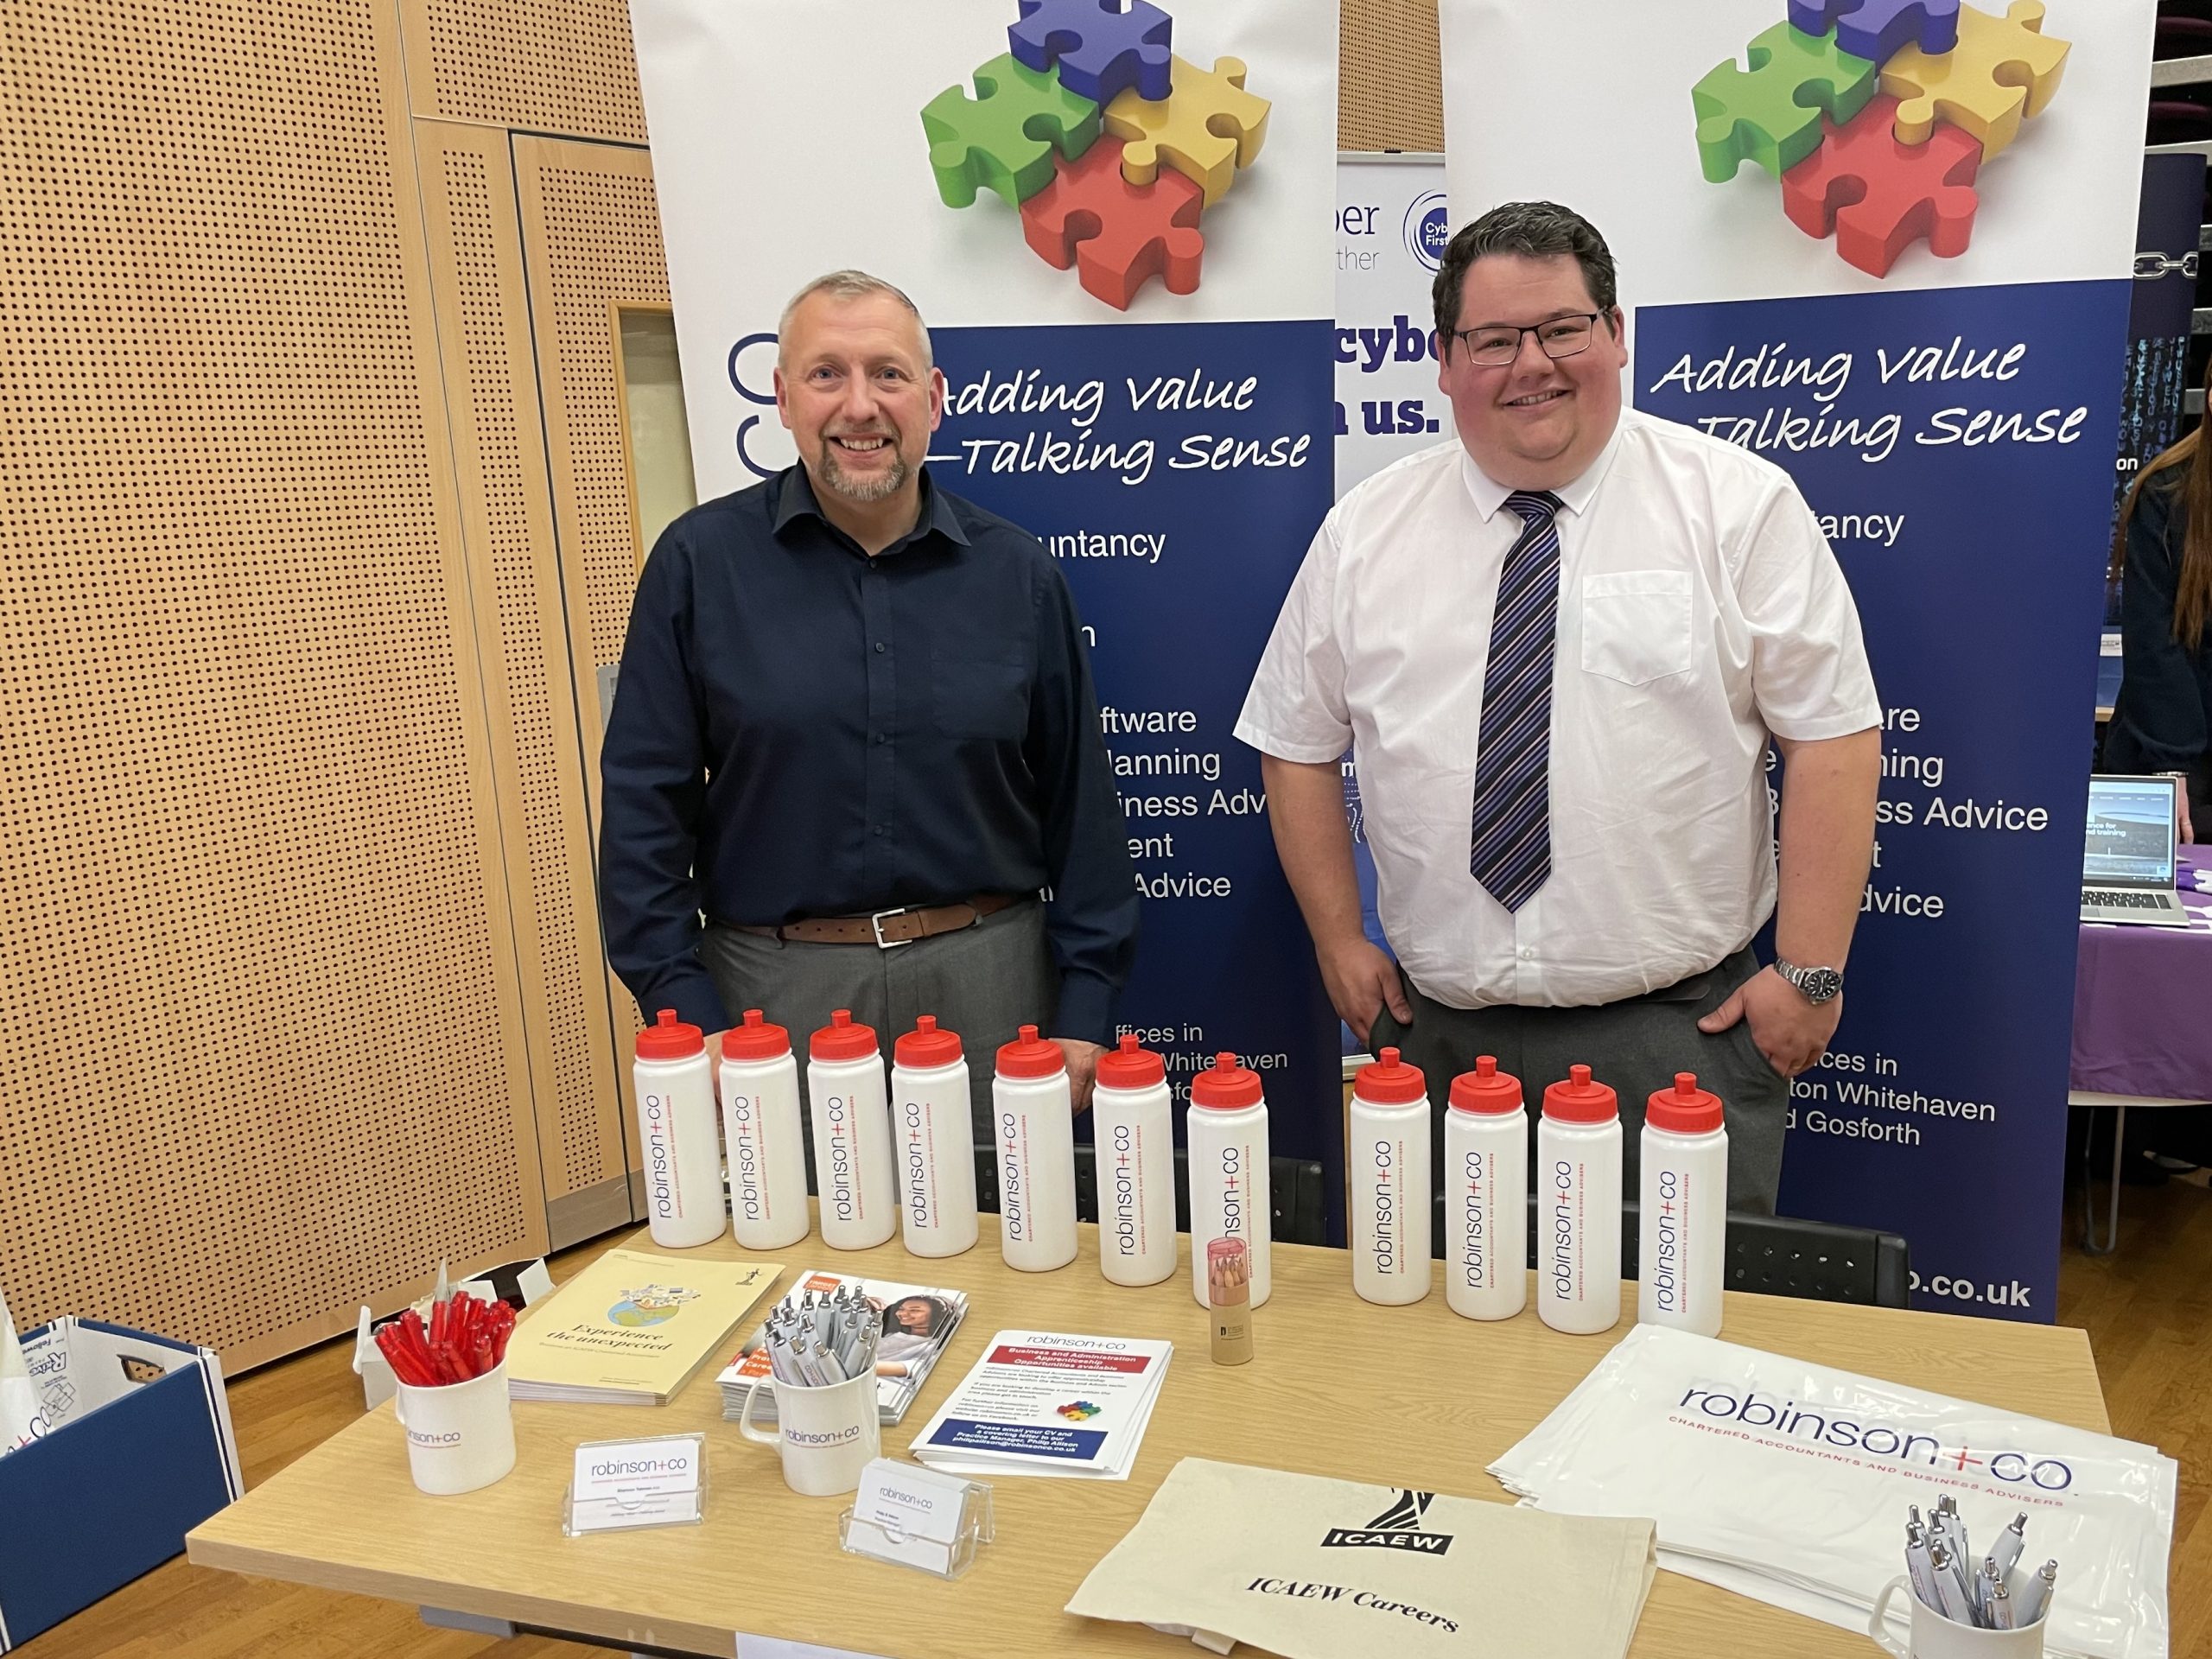 robinson+co at Lakes College's Employer and Careers Fair